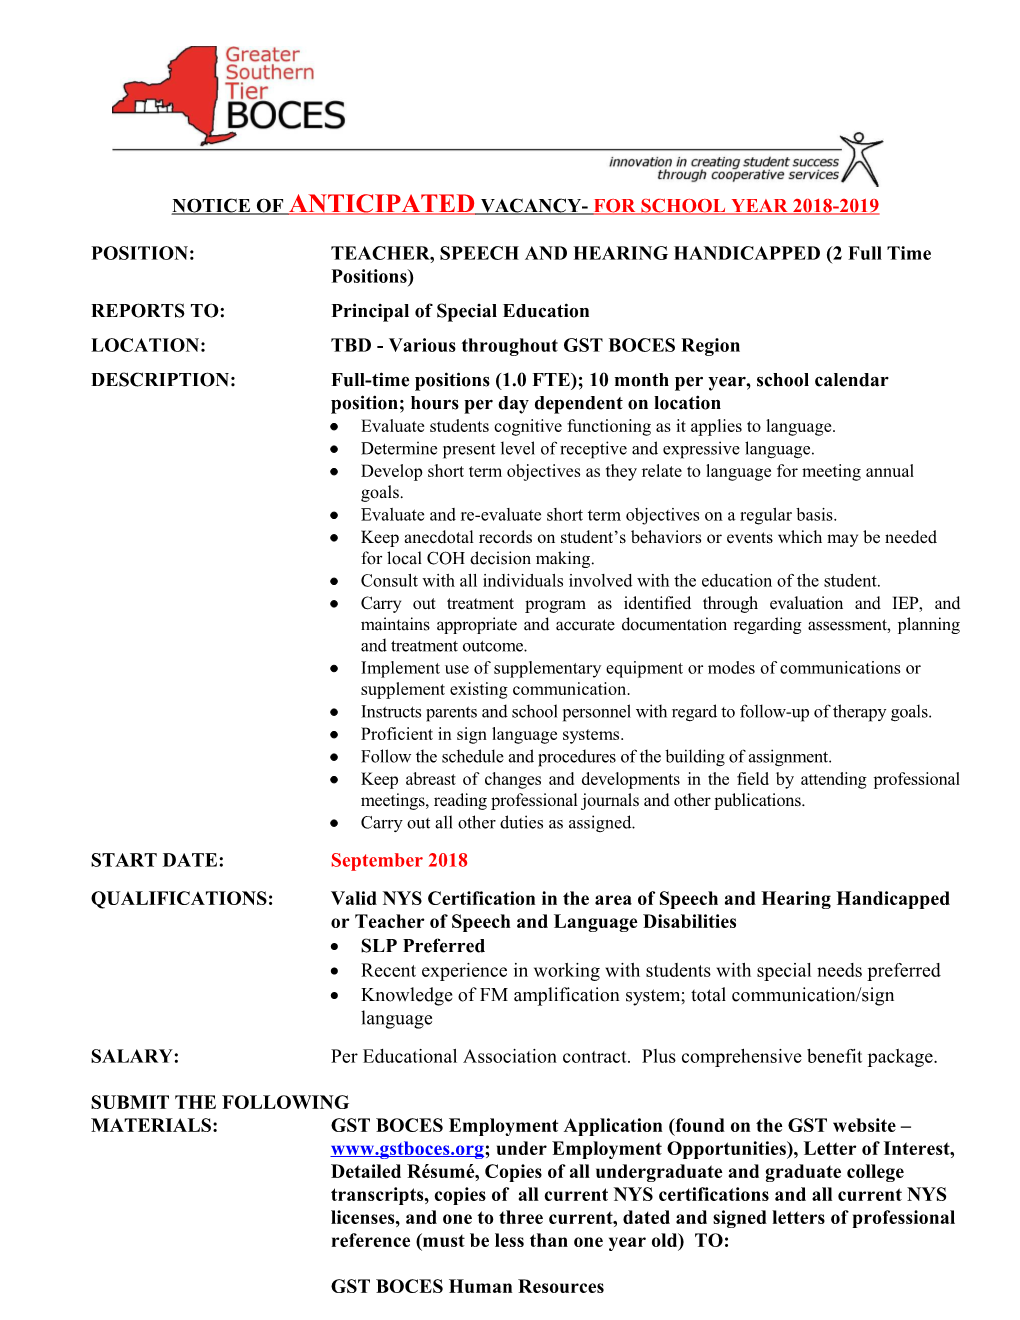 POSITION:TEACHER, SPEECH and HEARING HANDICAPPED (2 Full Time Positions)